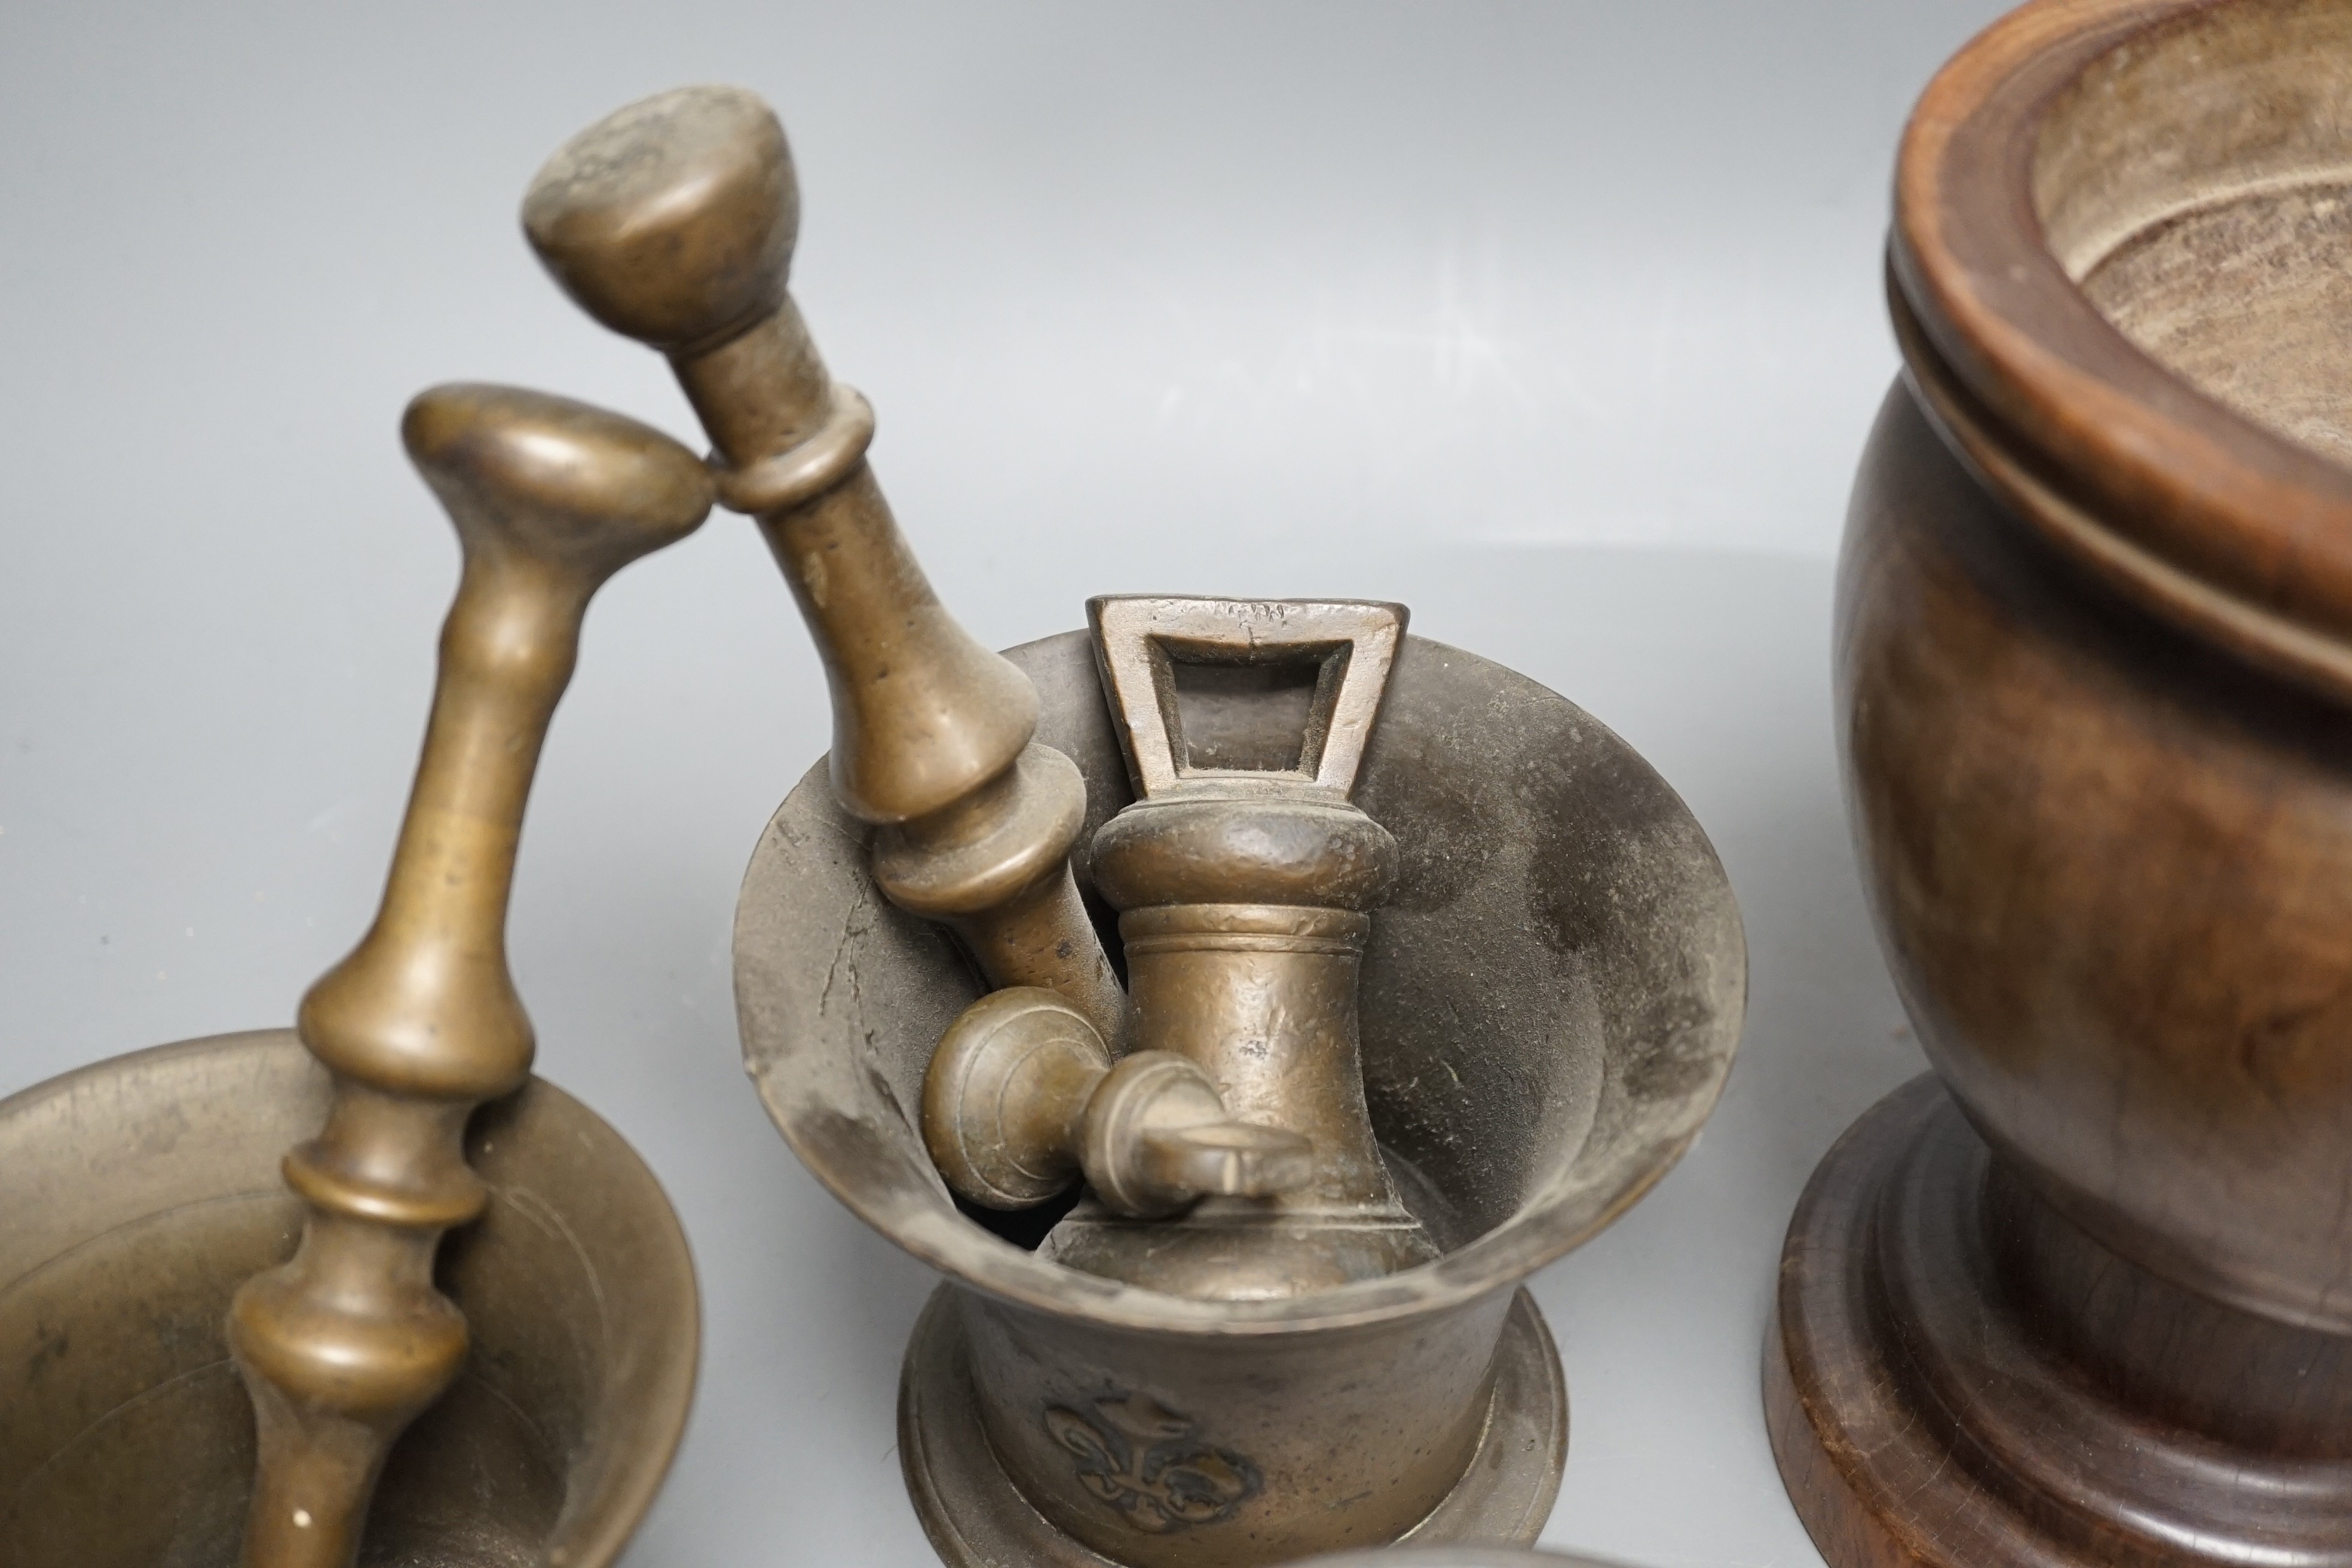 Three bell metal mortars, two pestles, a turned lignum vitae mortar and three postal weights, urn height 20cm